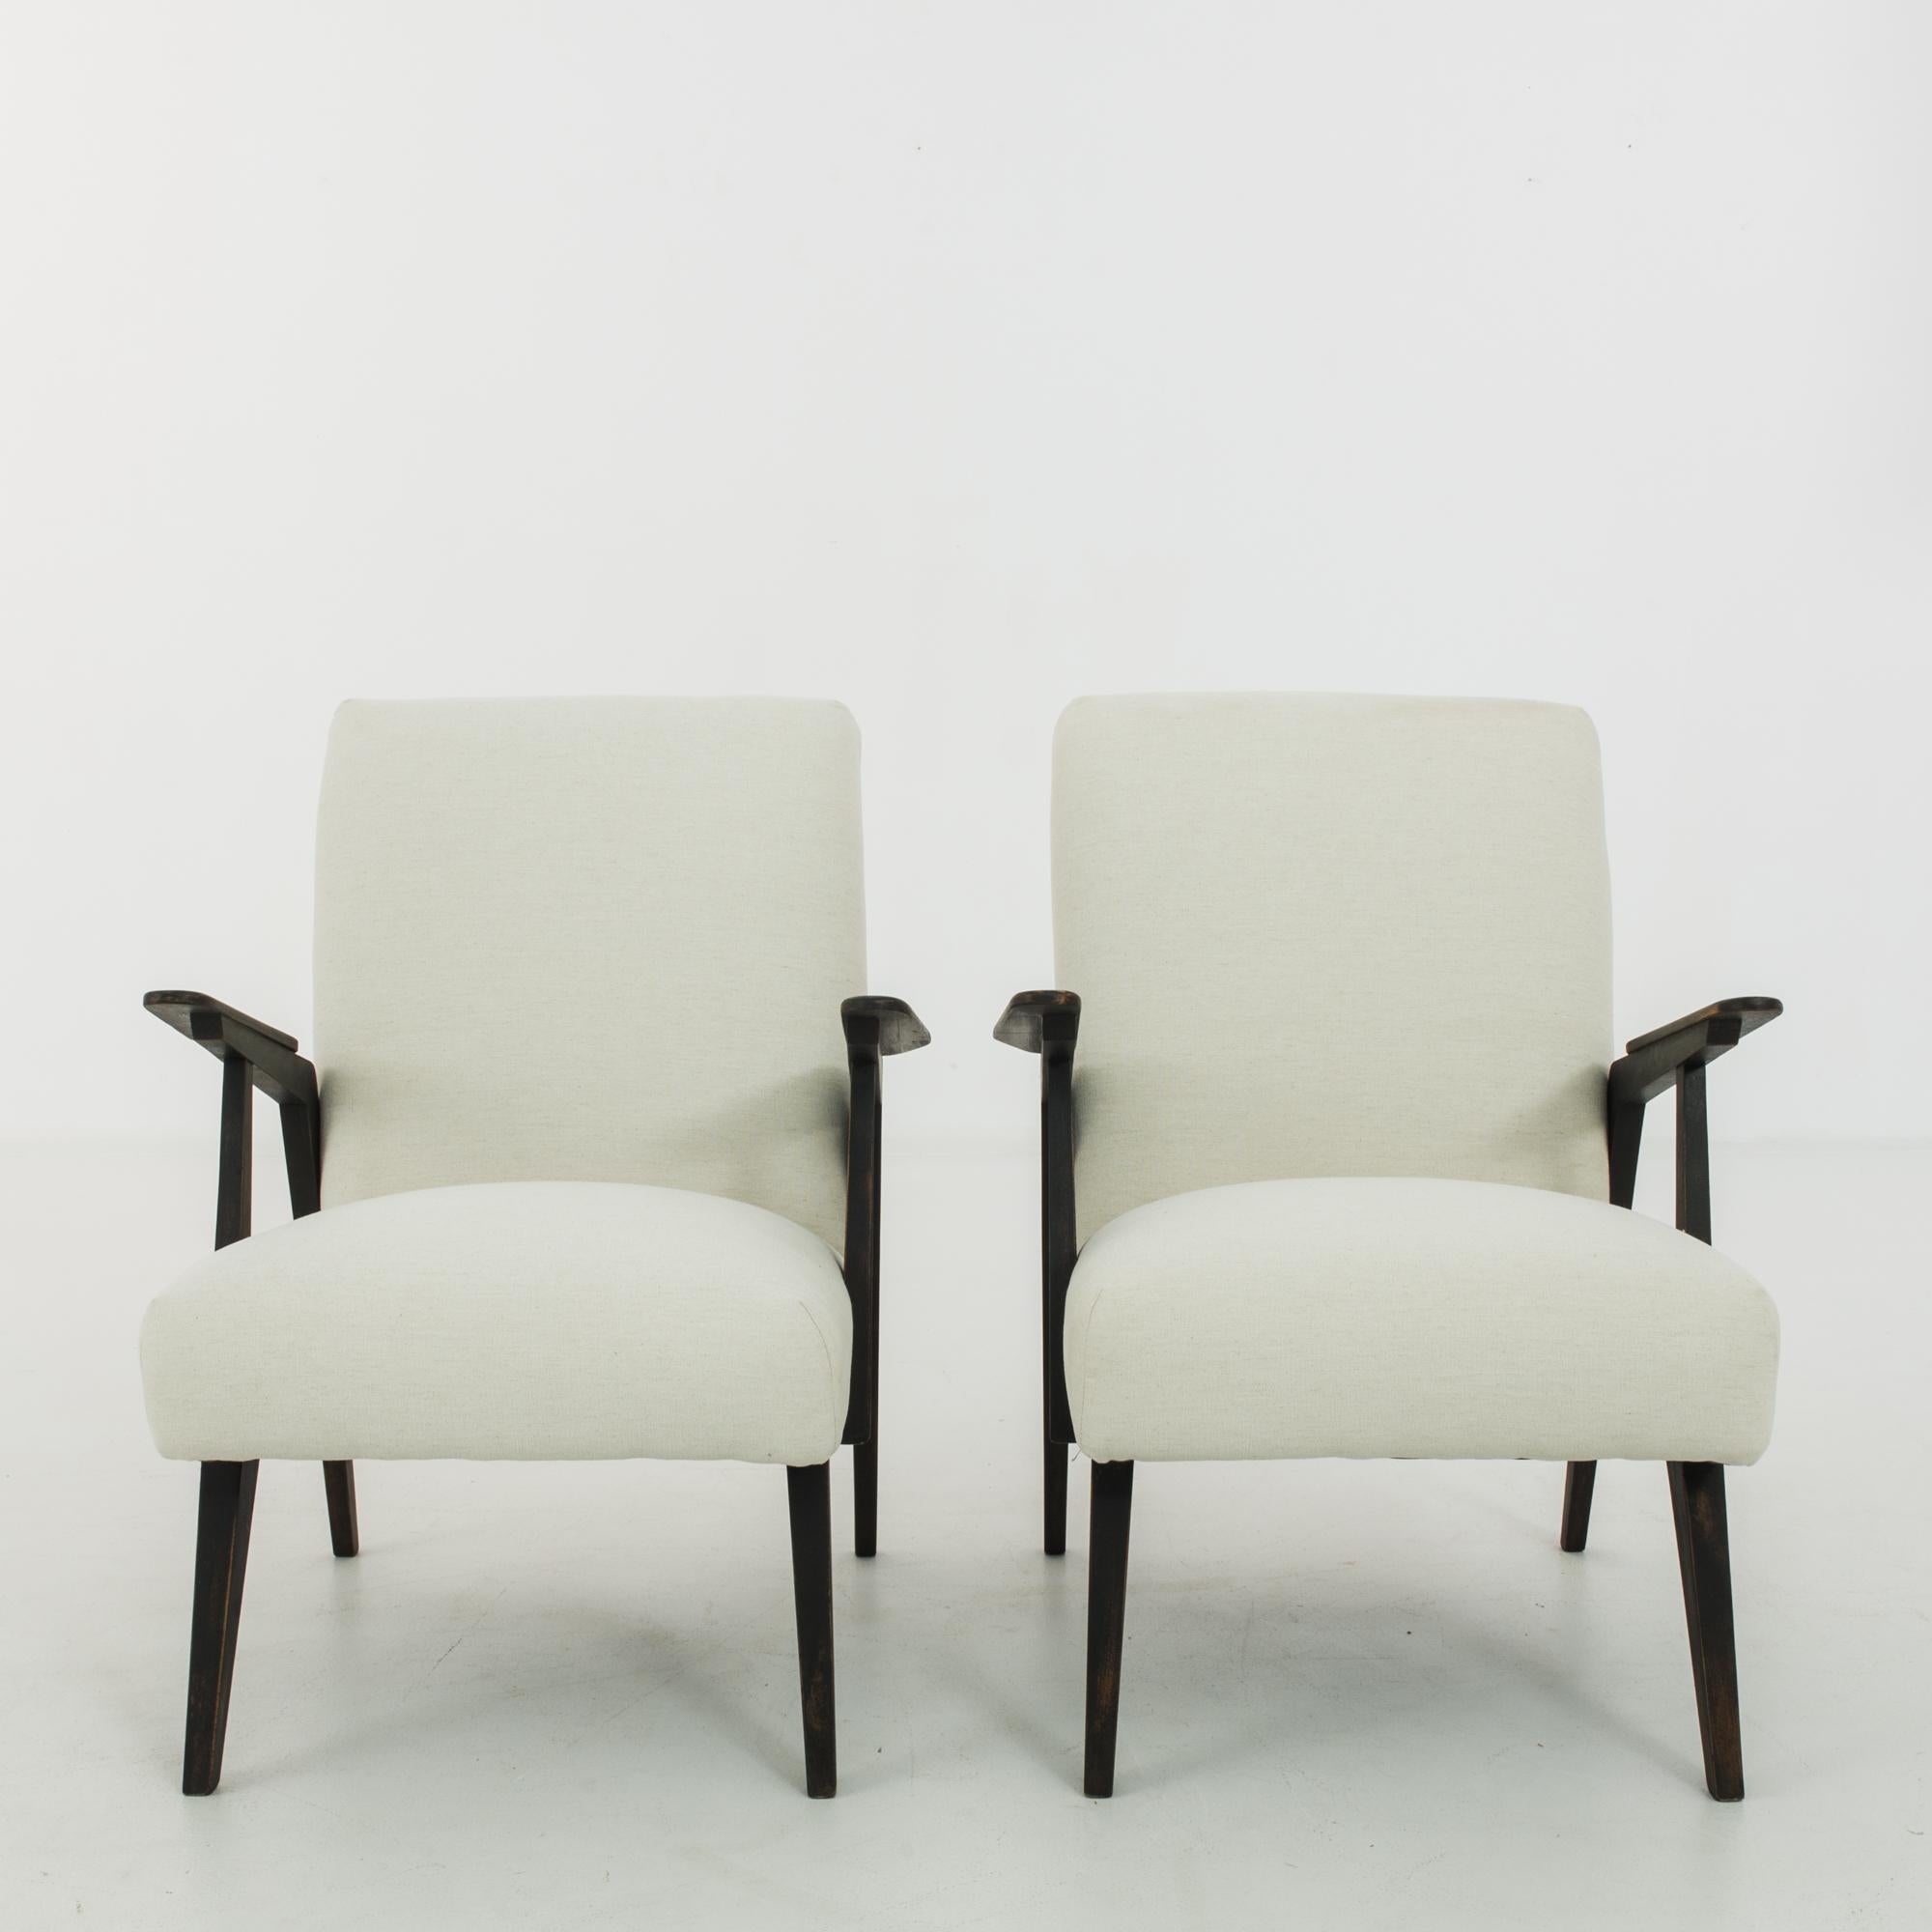 This pair of upholstered wooden armchairs was made in Czechoslovakia, circa 1950. Upturned angular armrests and tapered, splayed legs give the chairs a sense of motion, underscored by geometric seat cushions. The newly upholstered seats and backs